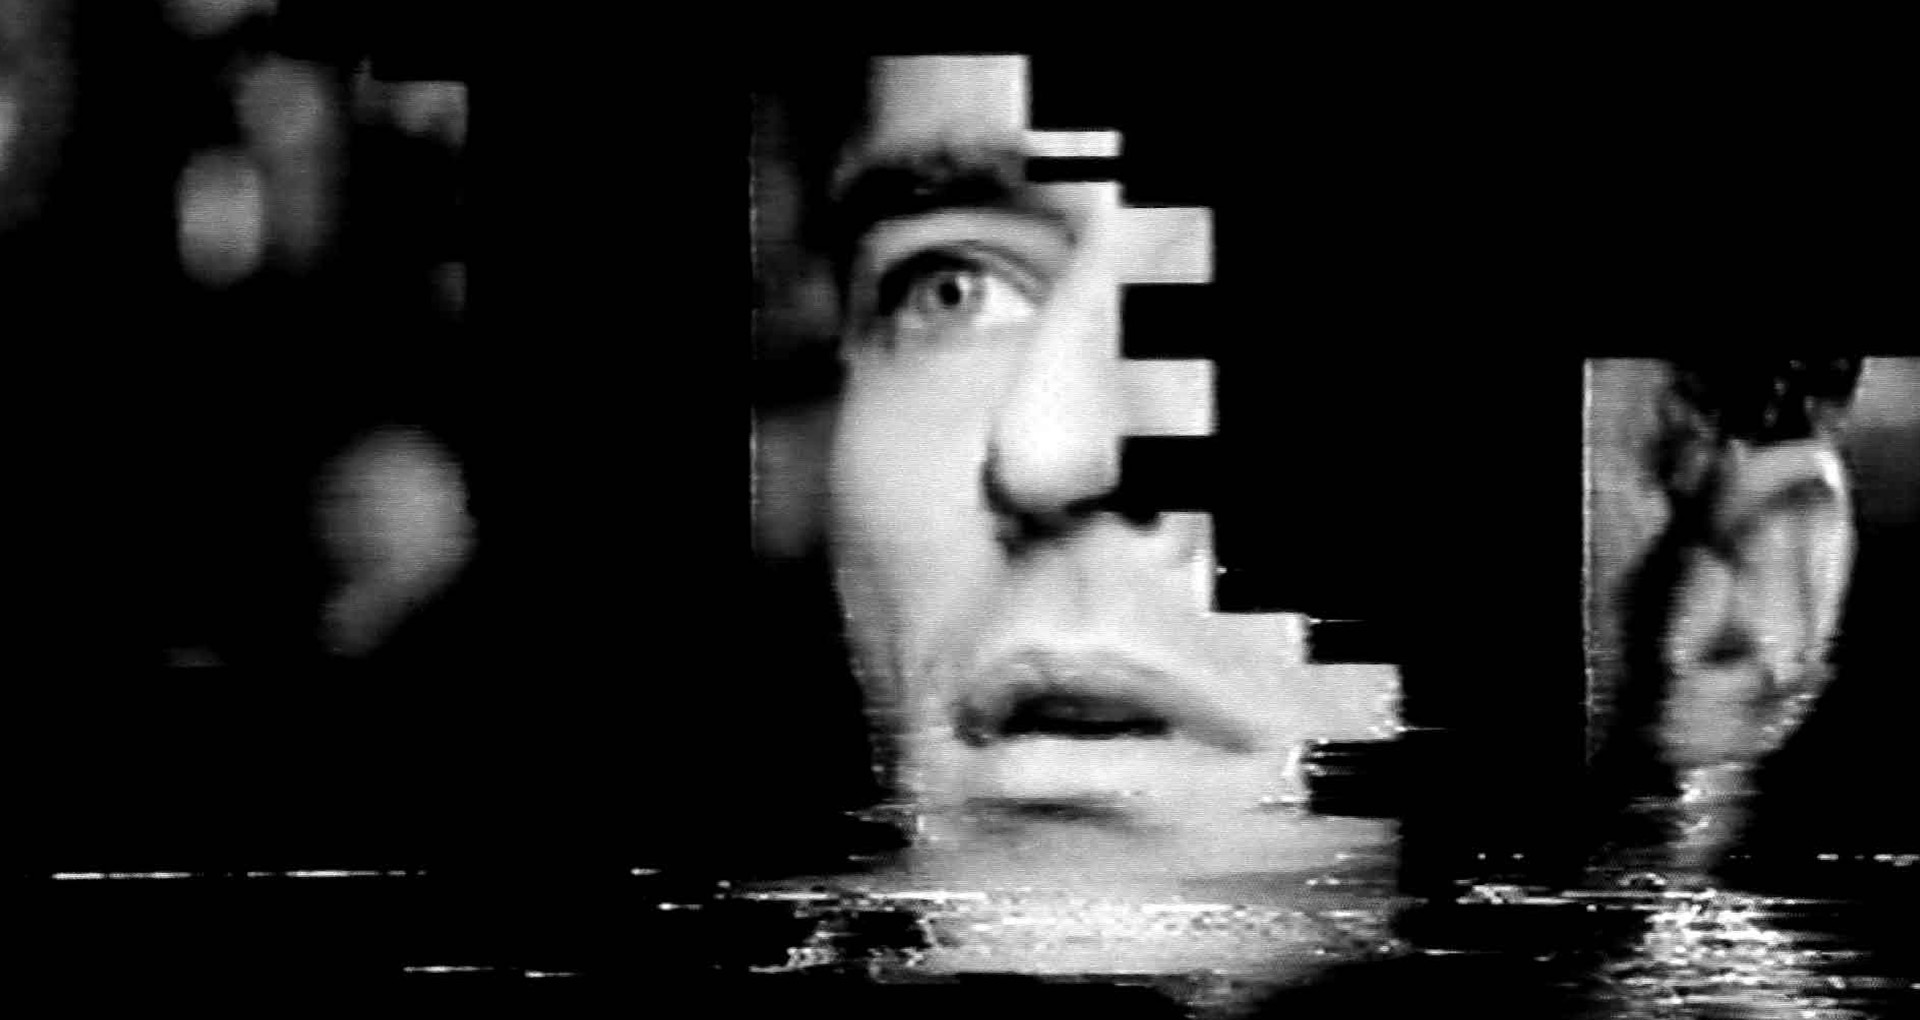 Black and white video image. A man's face is cut into pieces